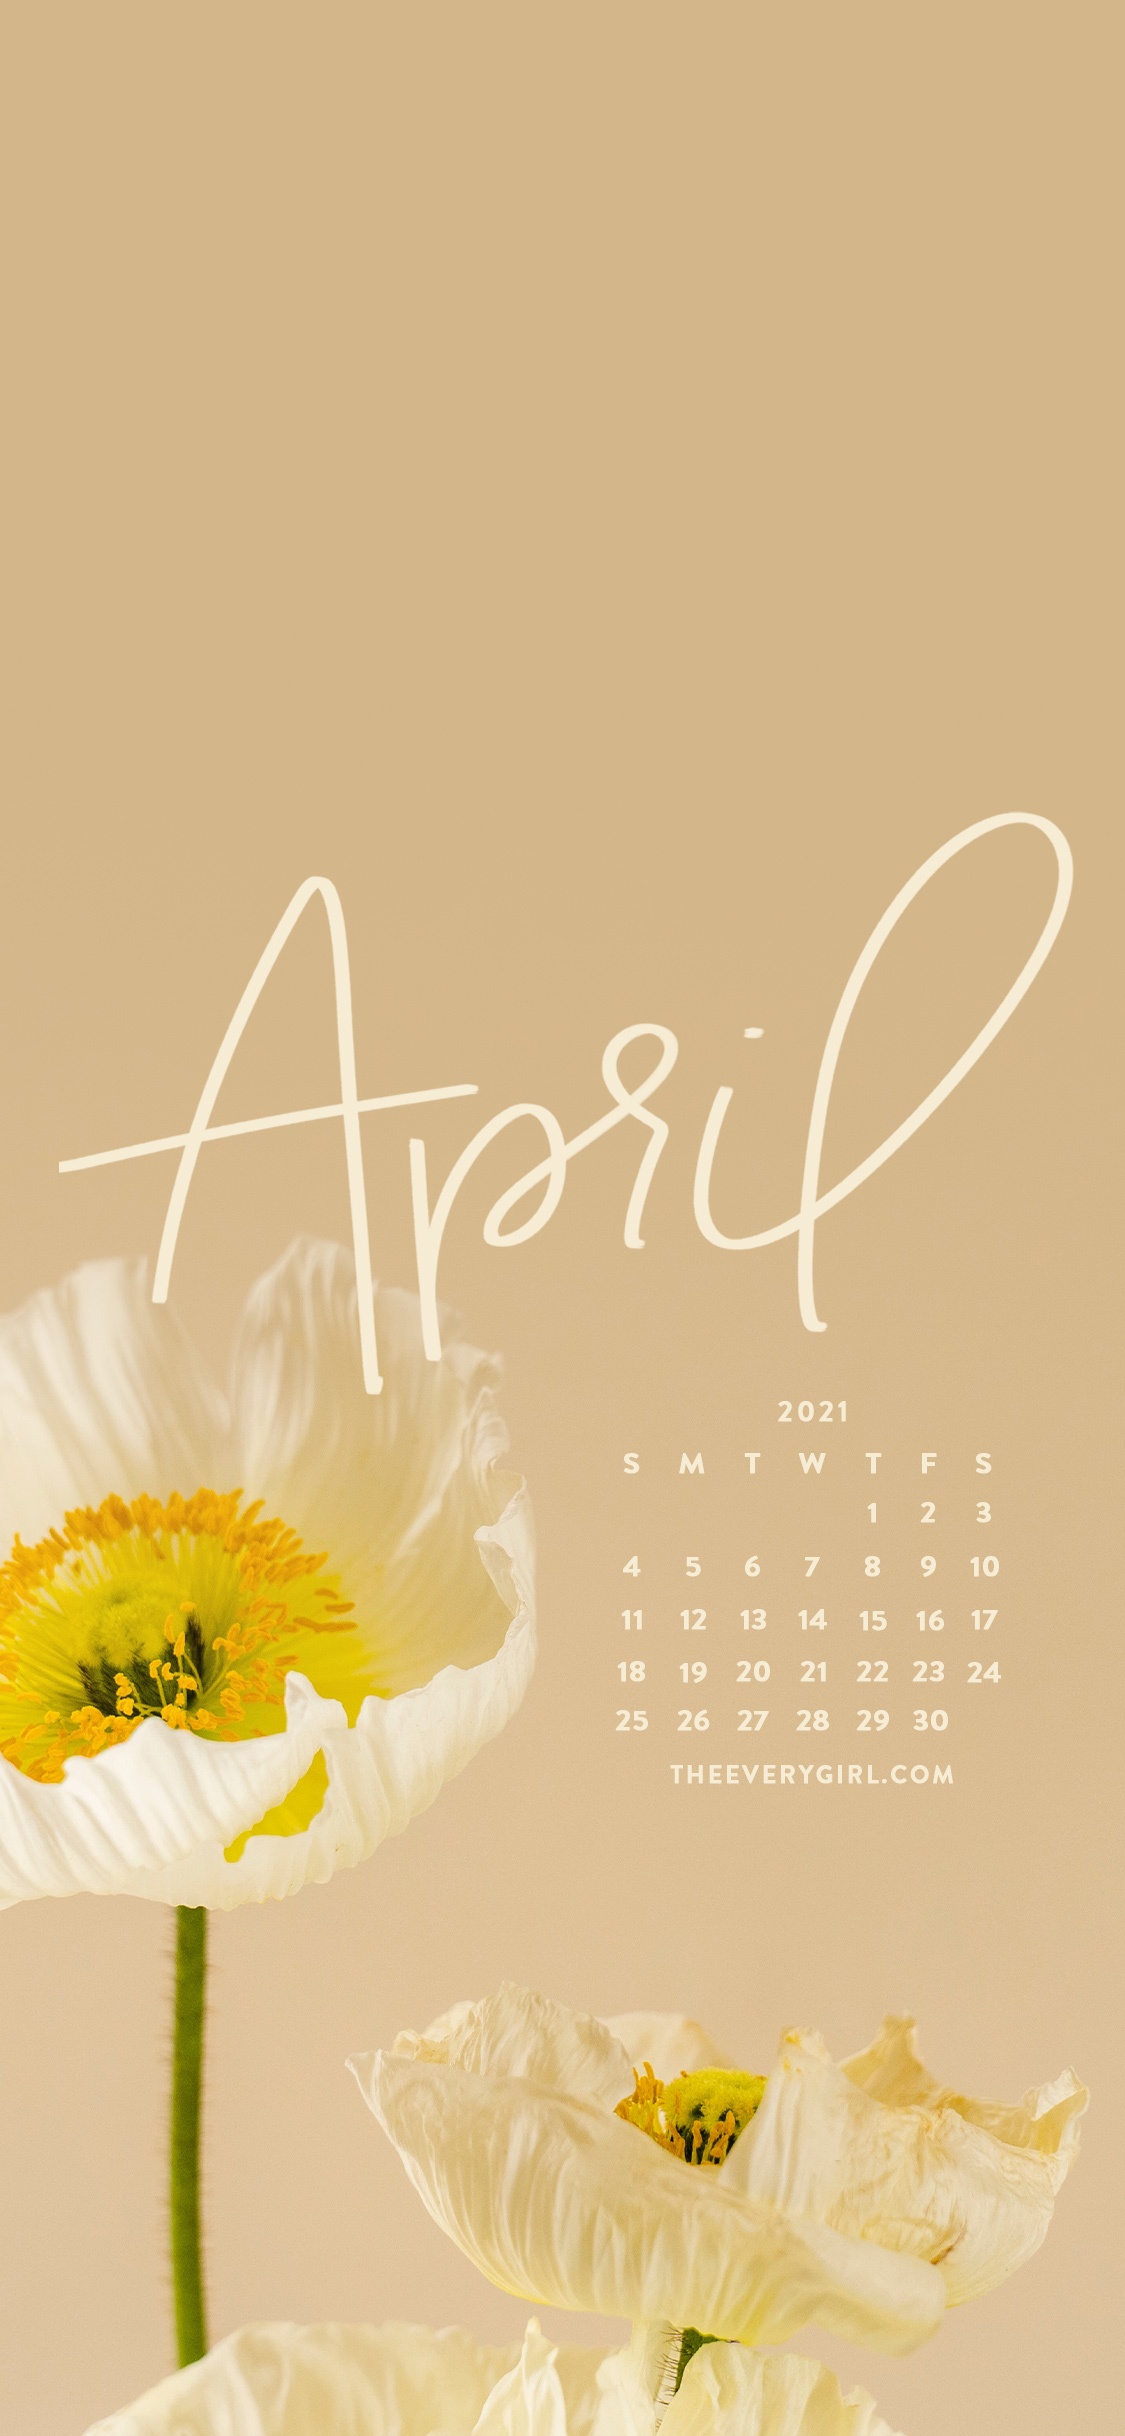 Free, Downloadable Tech Background for April 2021!